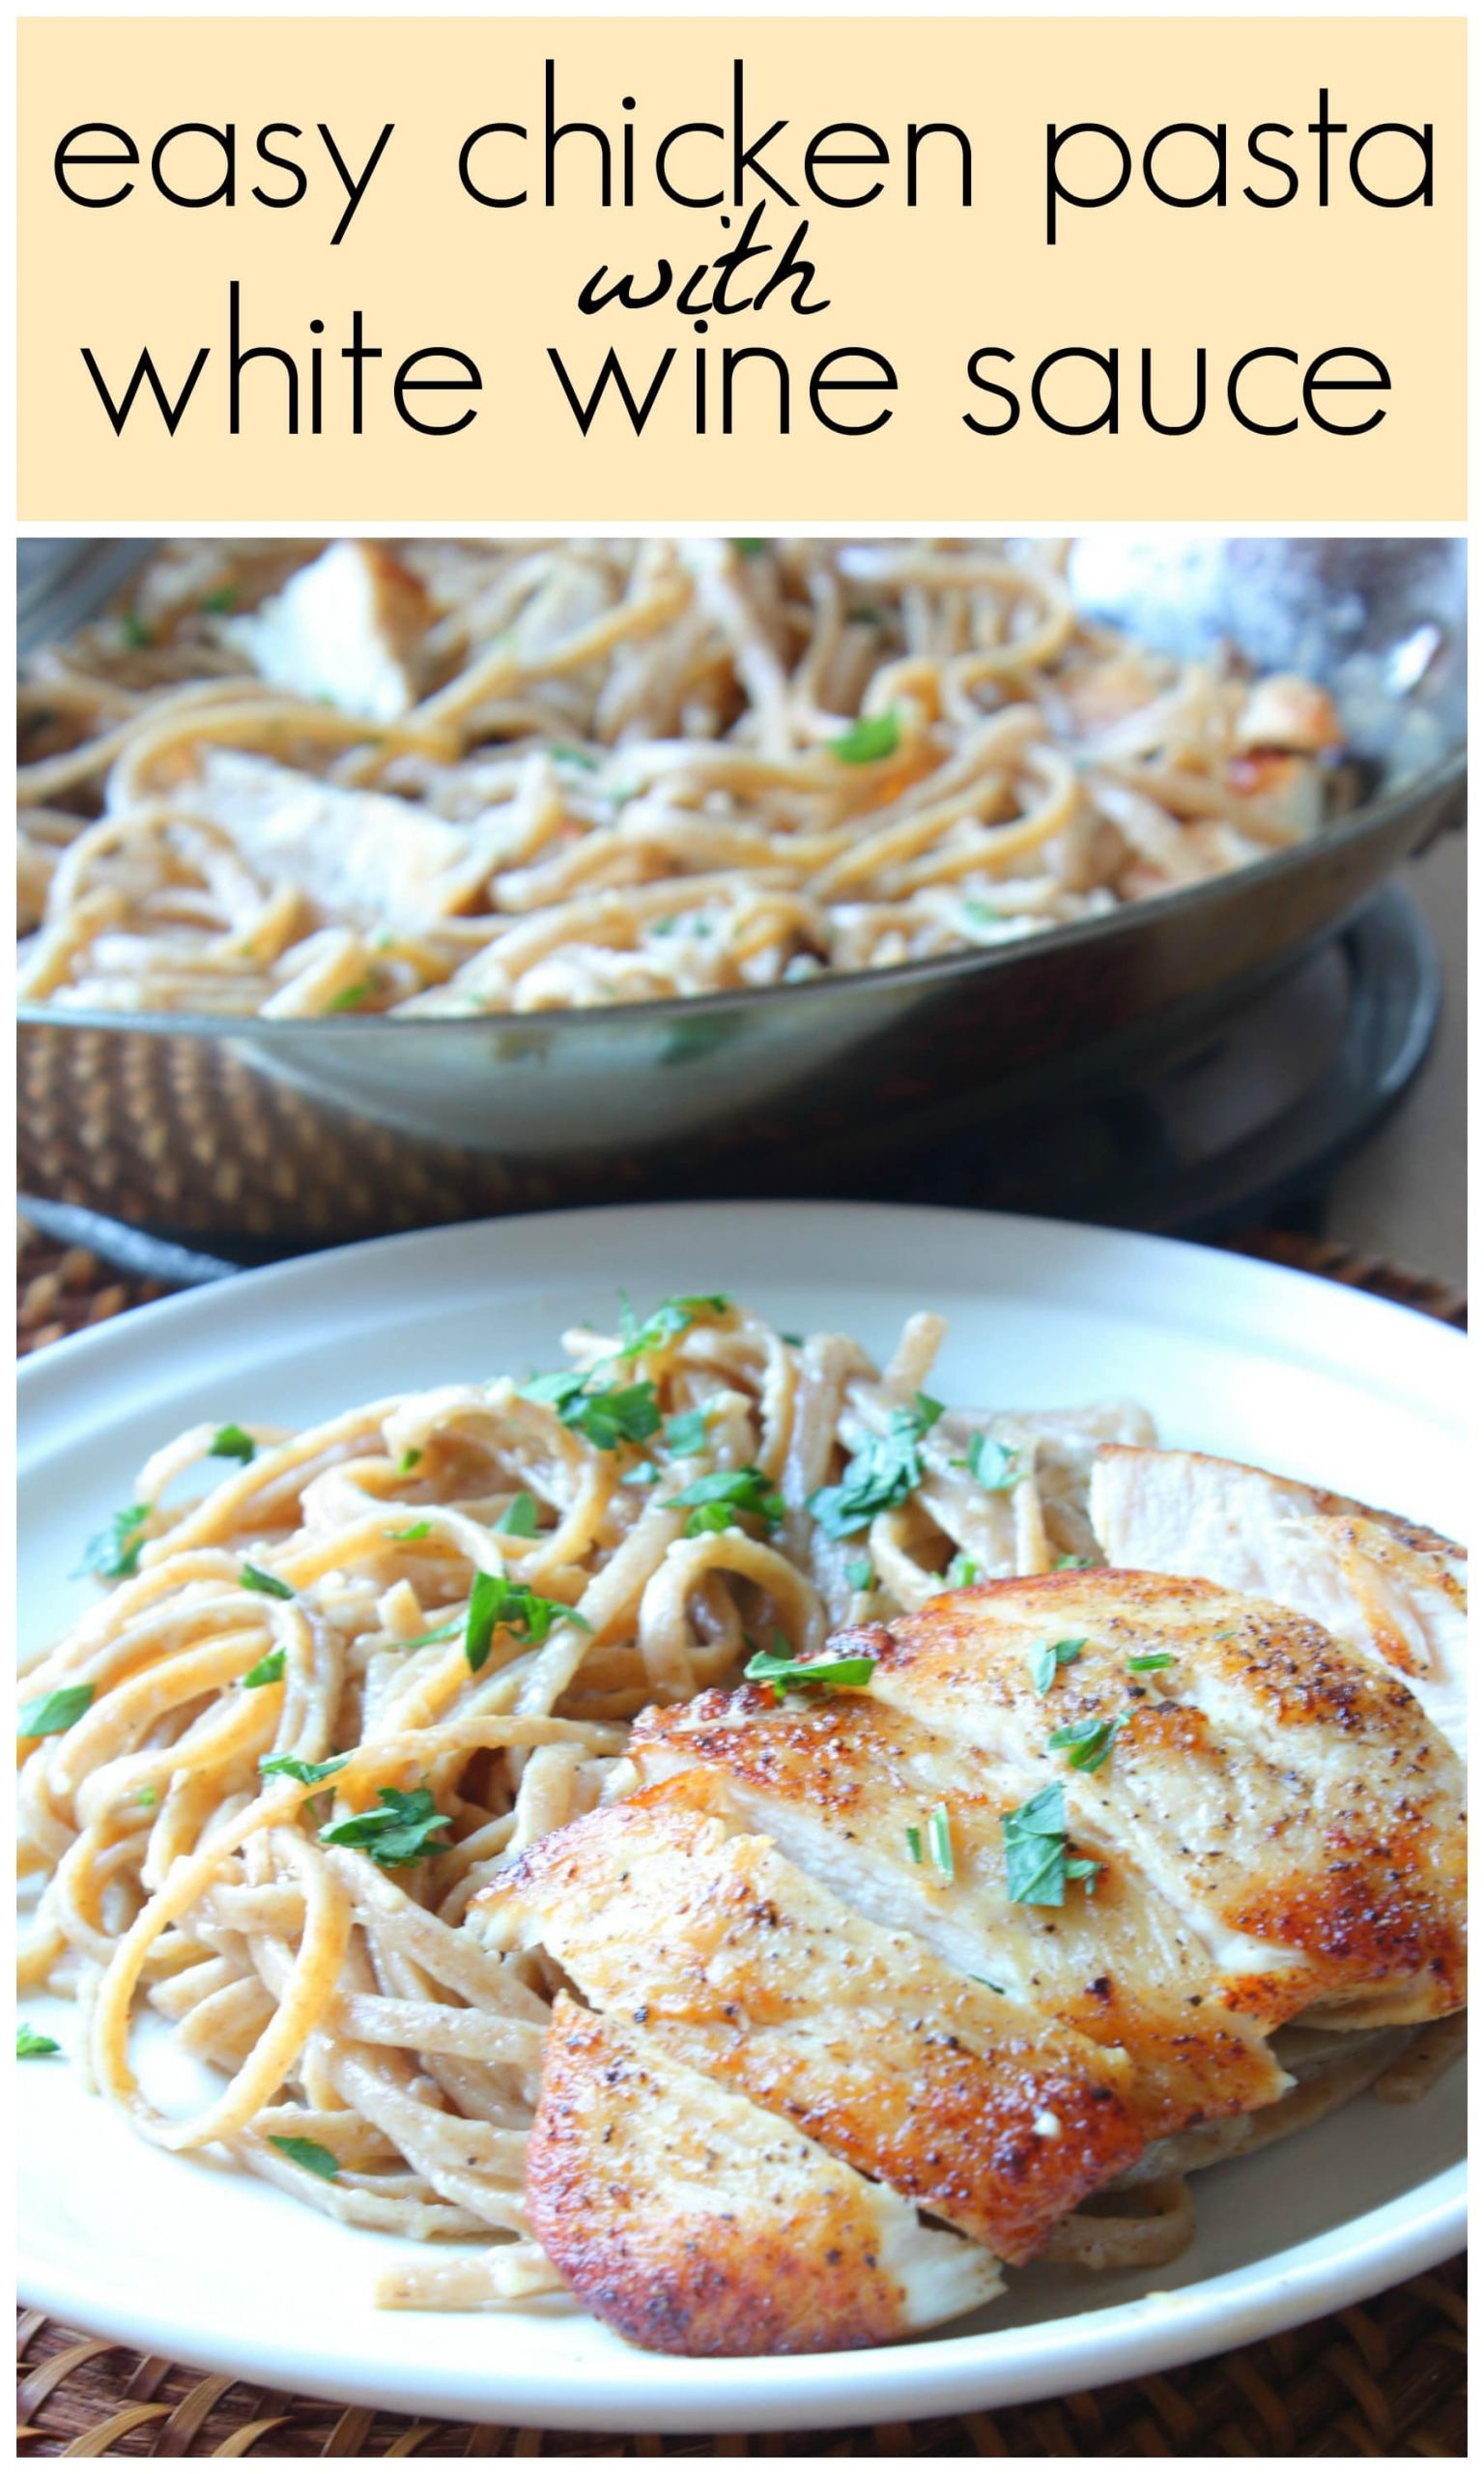 Easy Sauces For Chicken
 Easy Chicken Pasta with White Wine Sauce